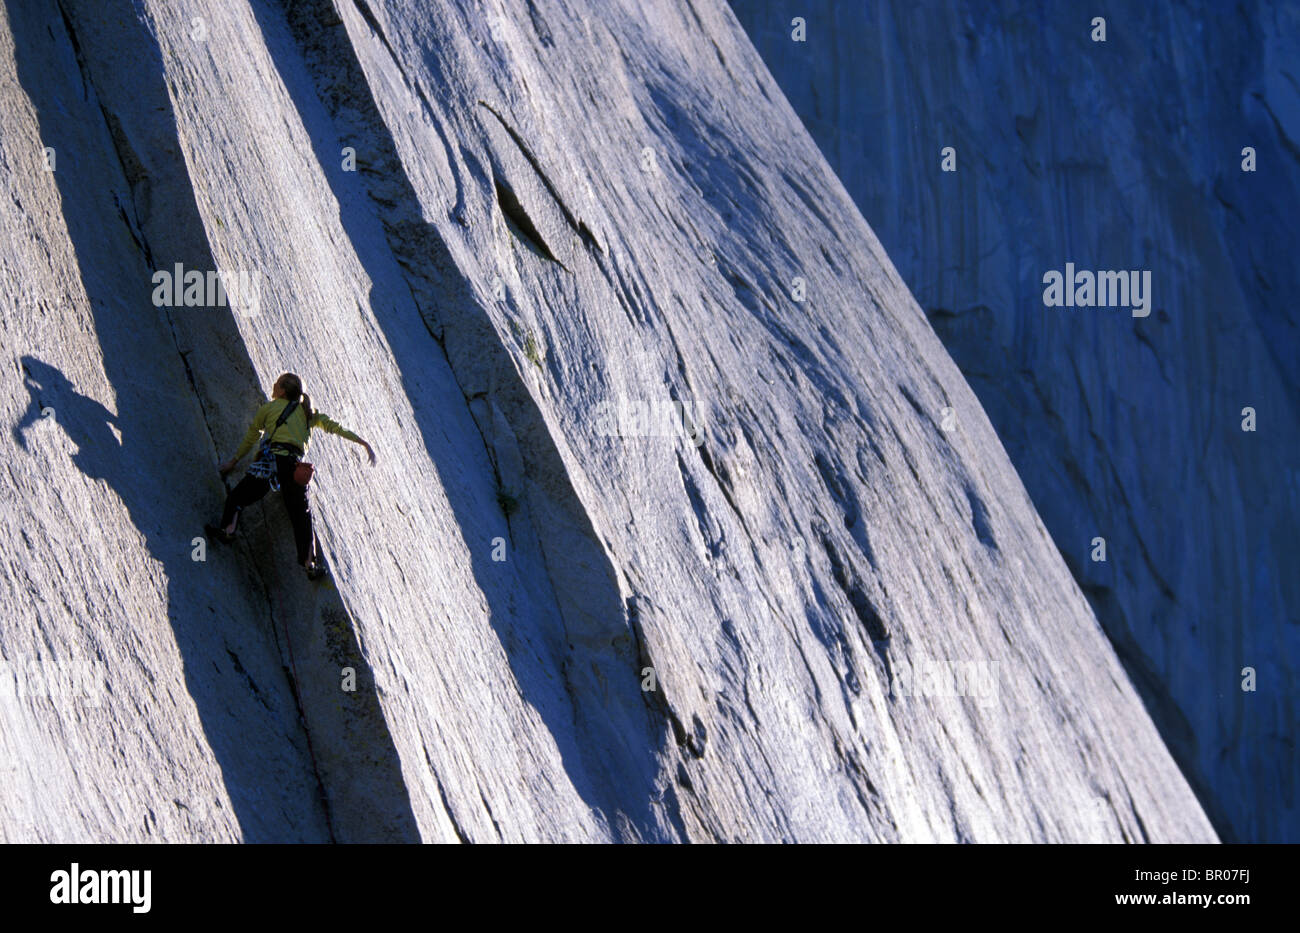 A female rock climber leading climbing a big granite wall in Yosemite National Park. Stock Photo